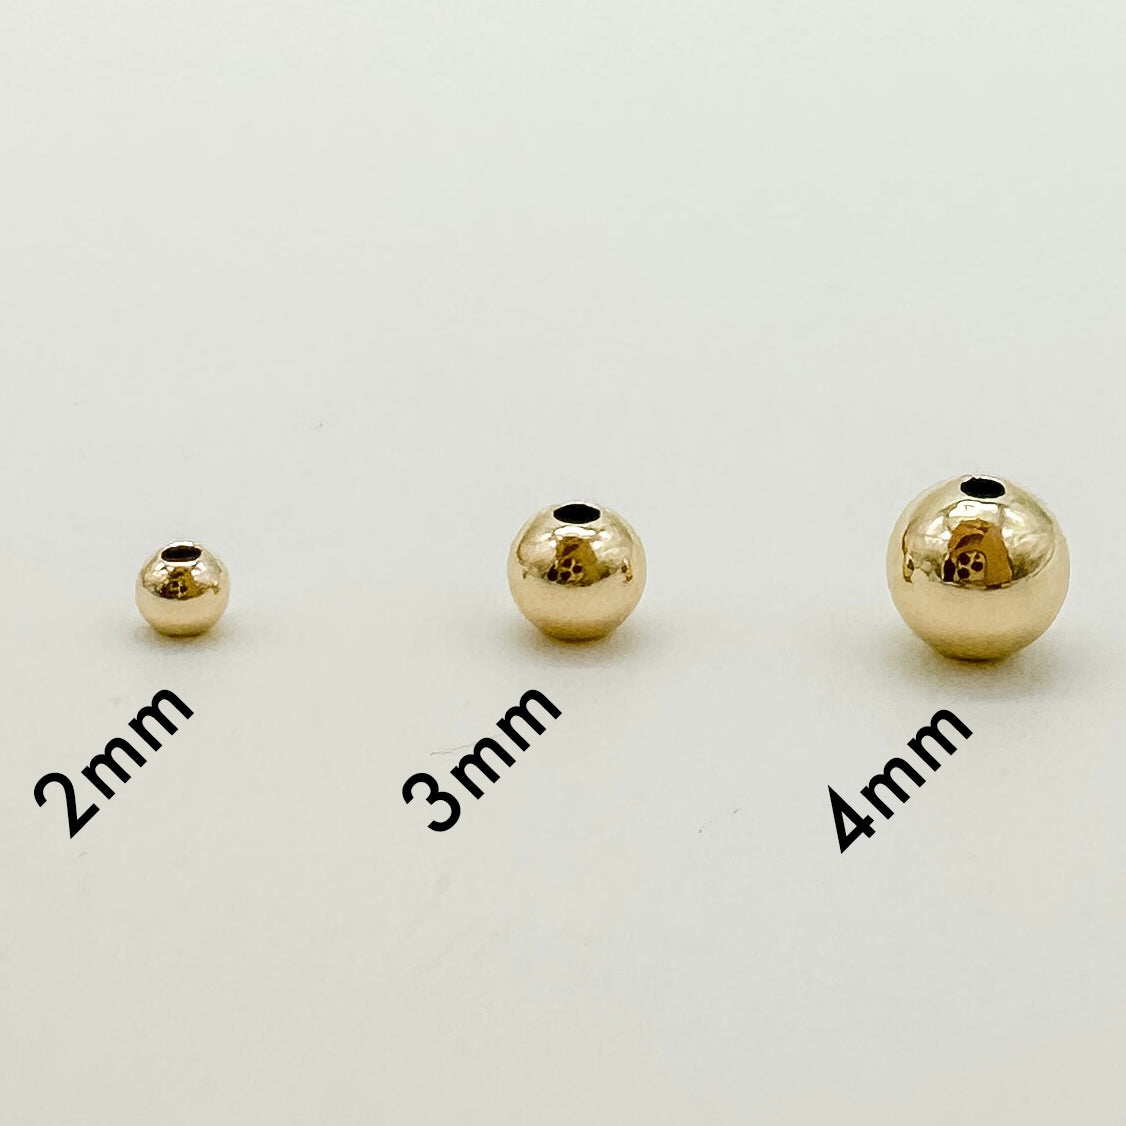 4mm round gold filled beads / wholesale gold filled beads / round gold filled beads